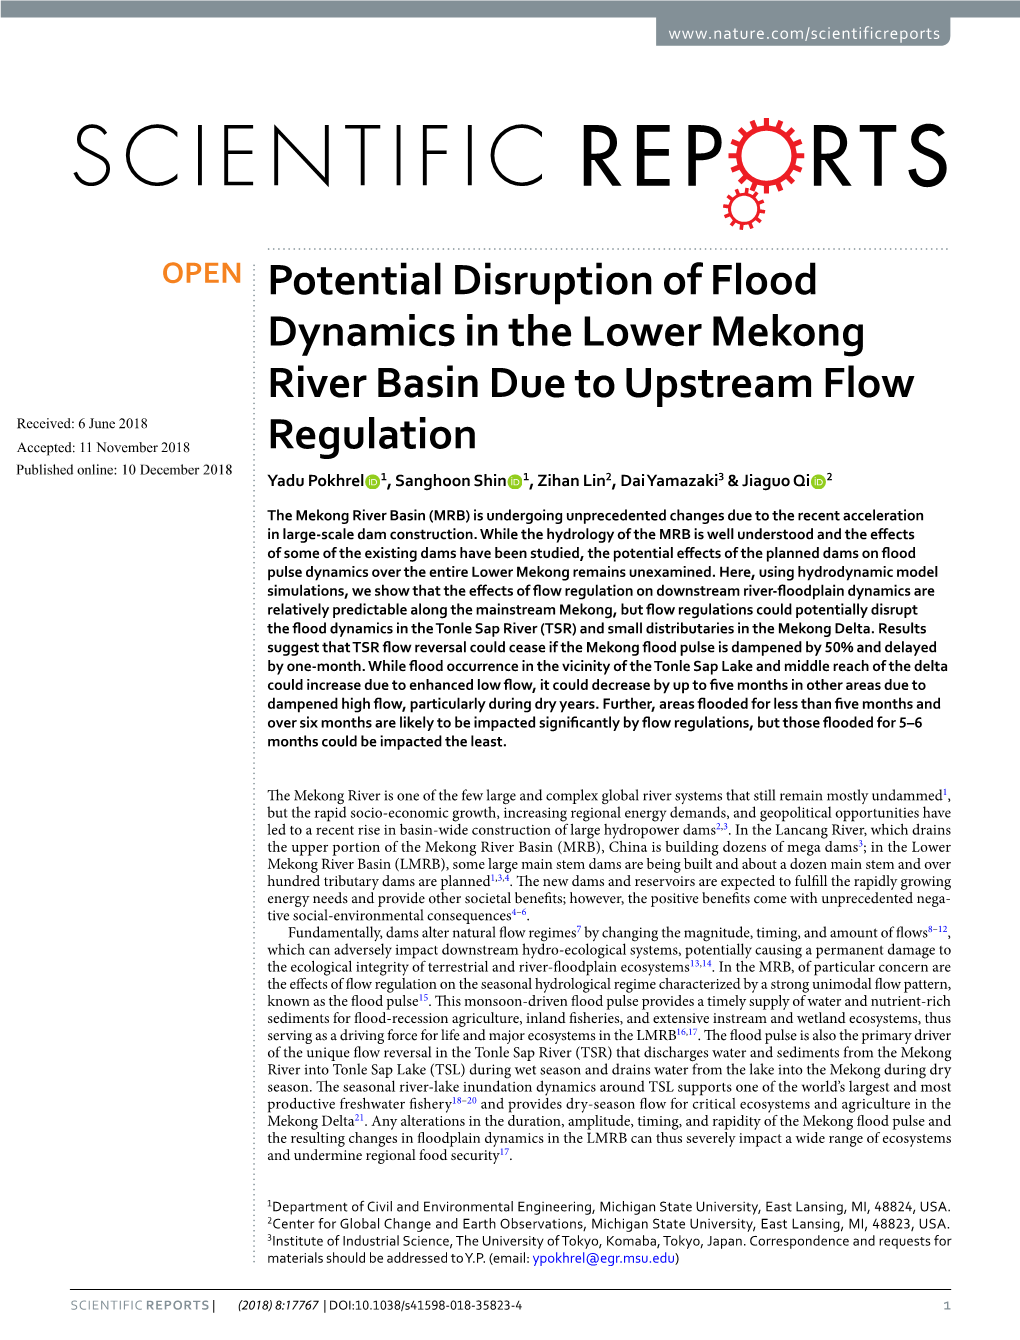 Potential Disruption of Flood Dynamics in the Lower Mekong